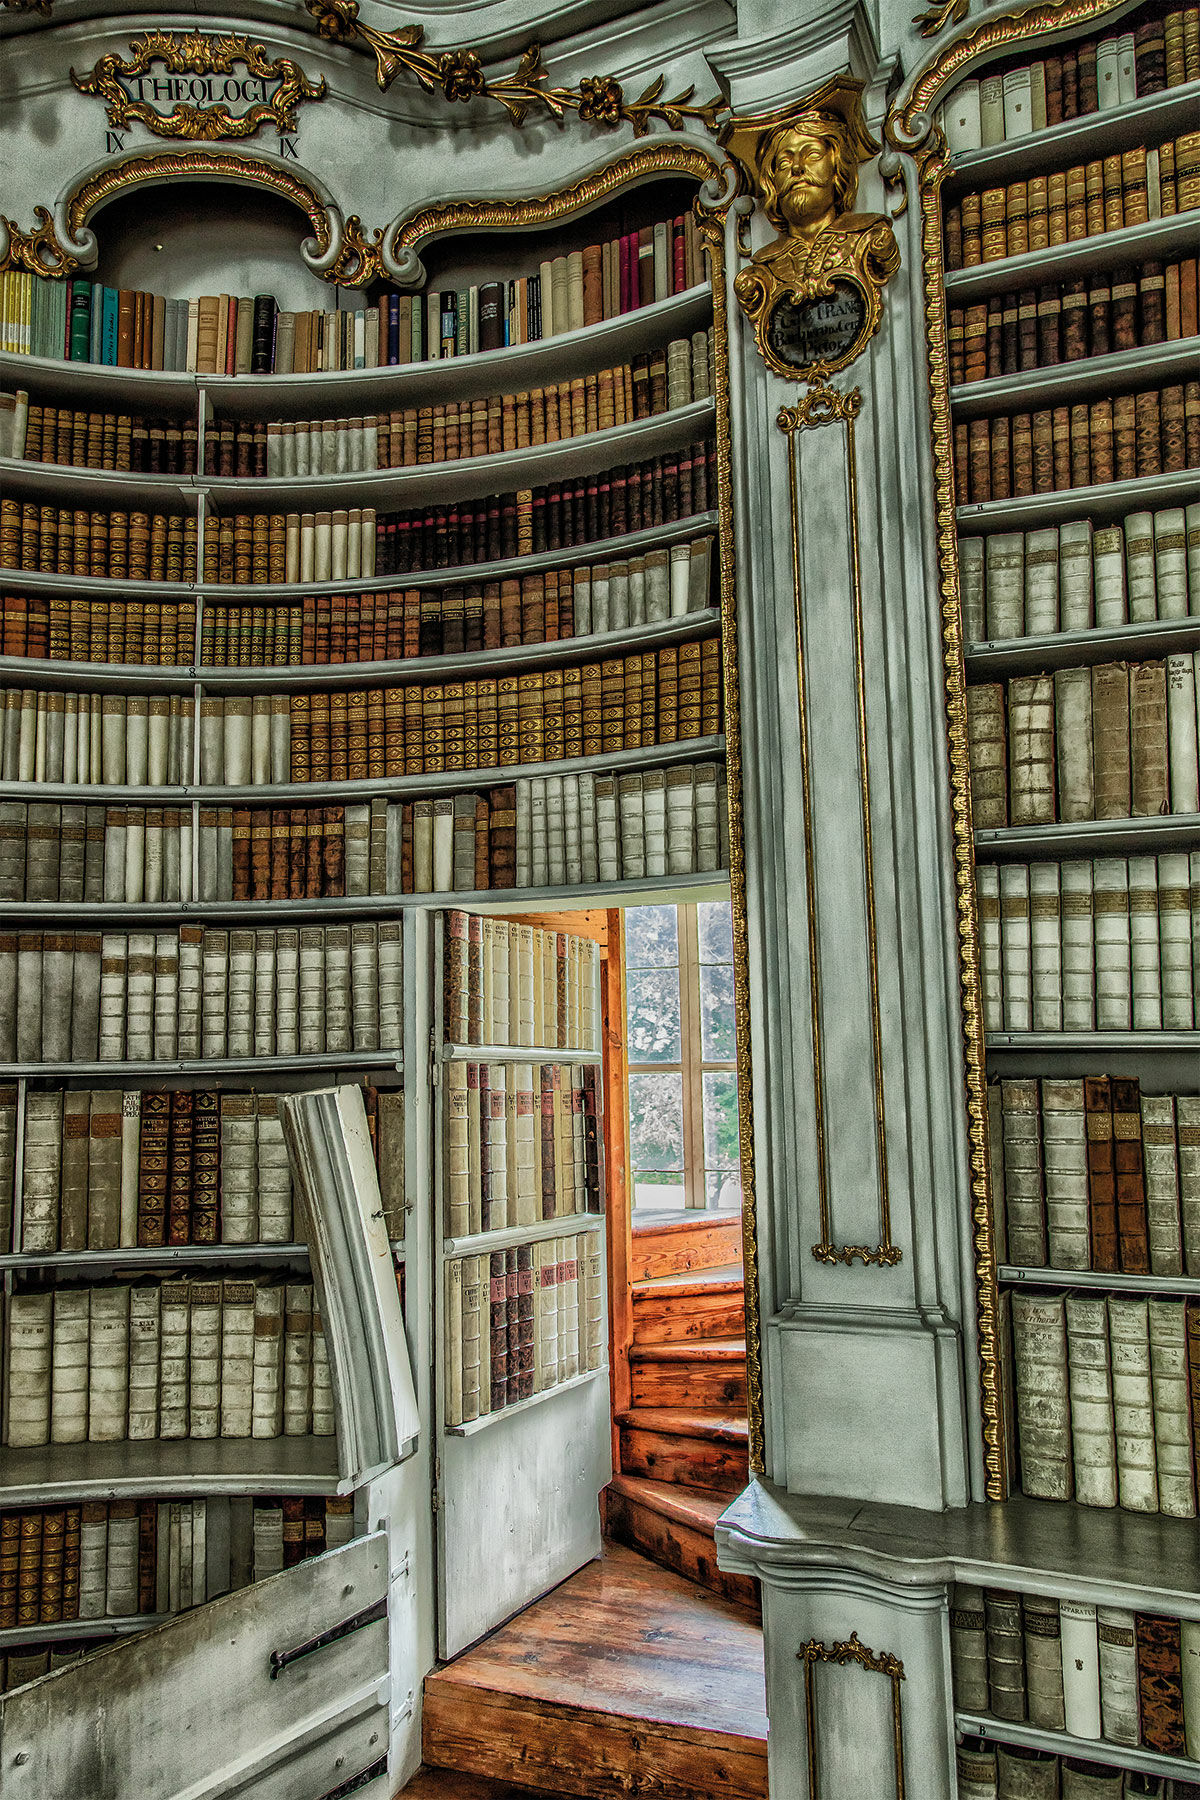 Picture "Historic Bookcase" by Peter Odekerken